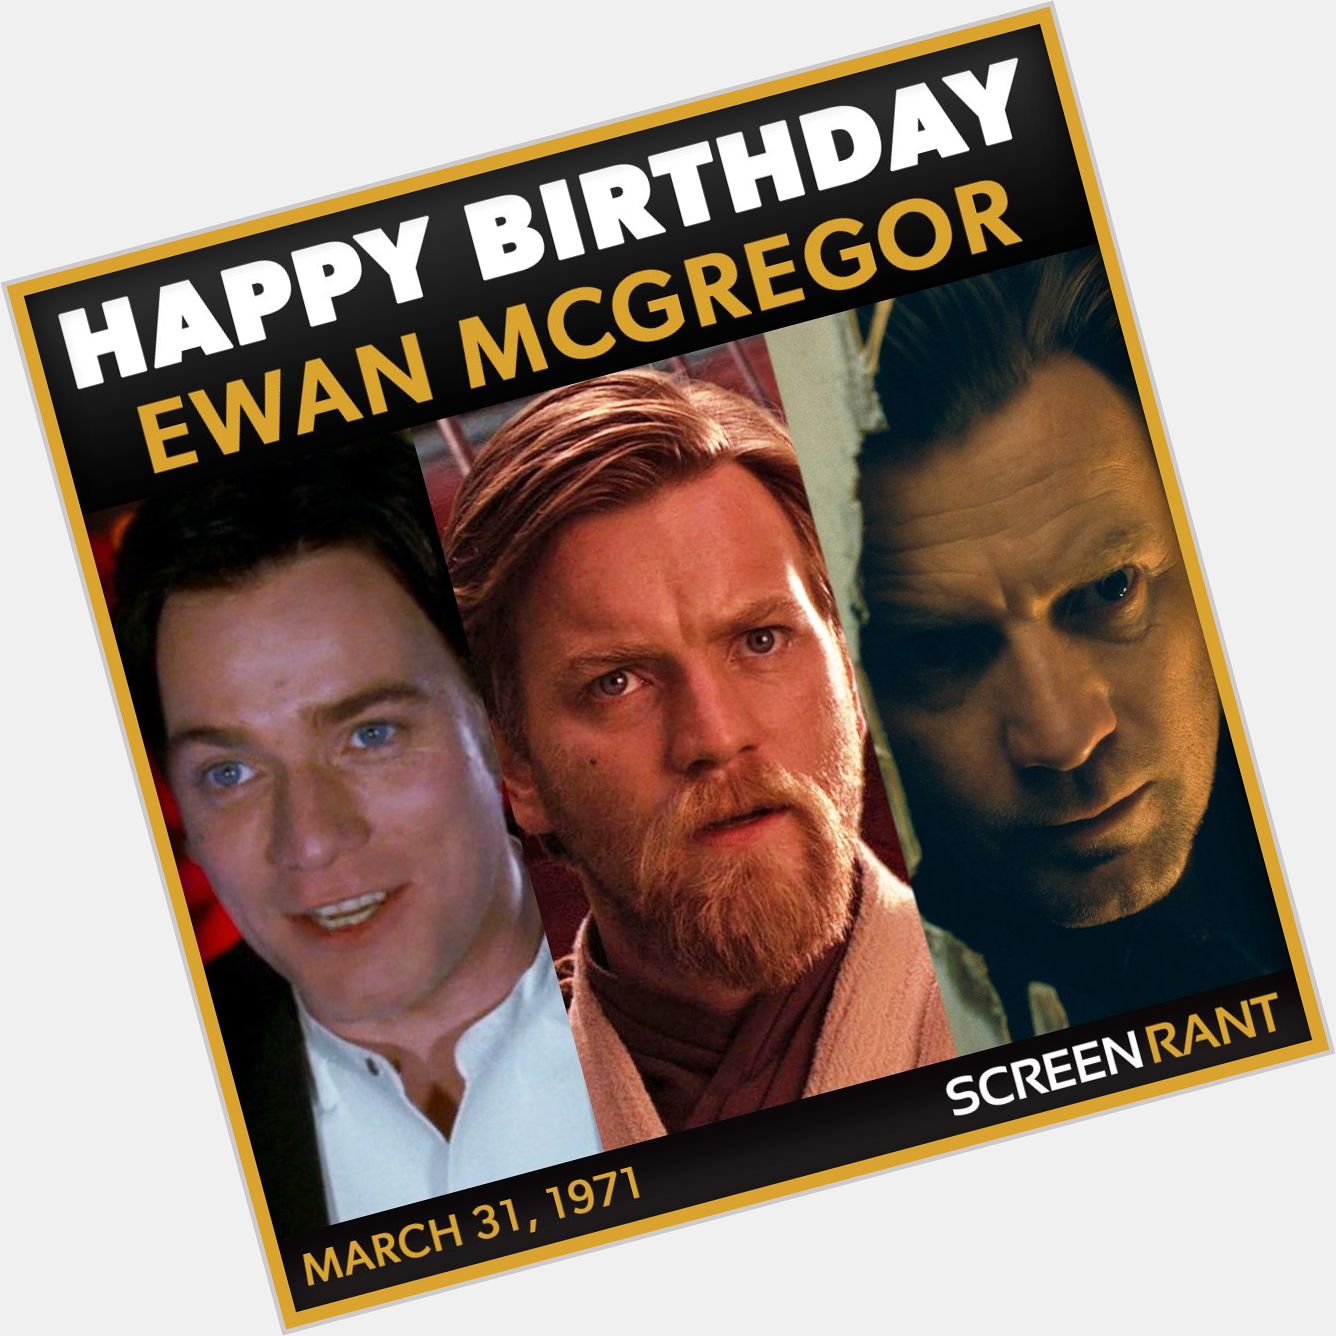 Hello There! Happy Birthday to the great Ewan McGregor! Share with us your favorite roles, quotes or moments. 